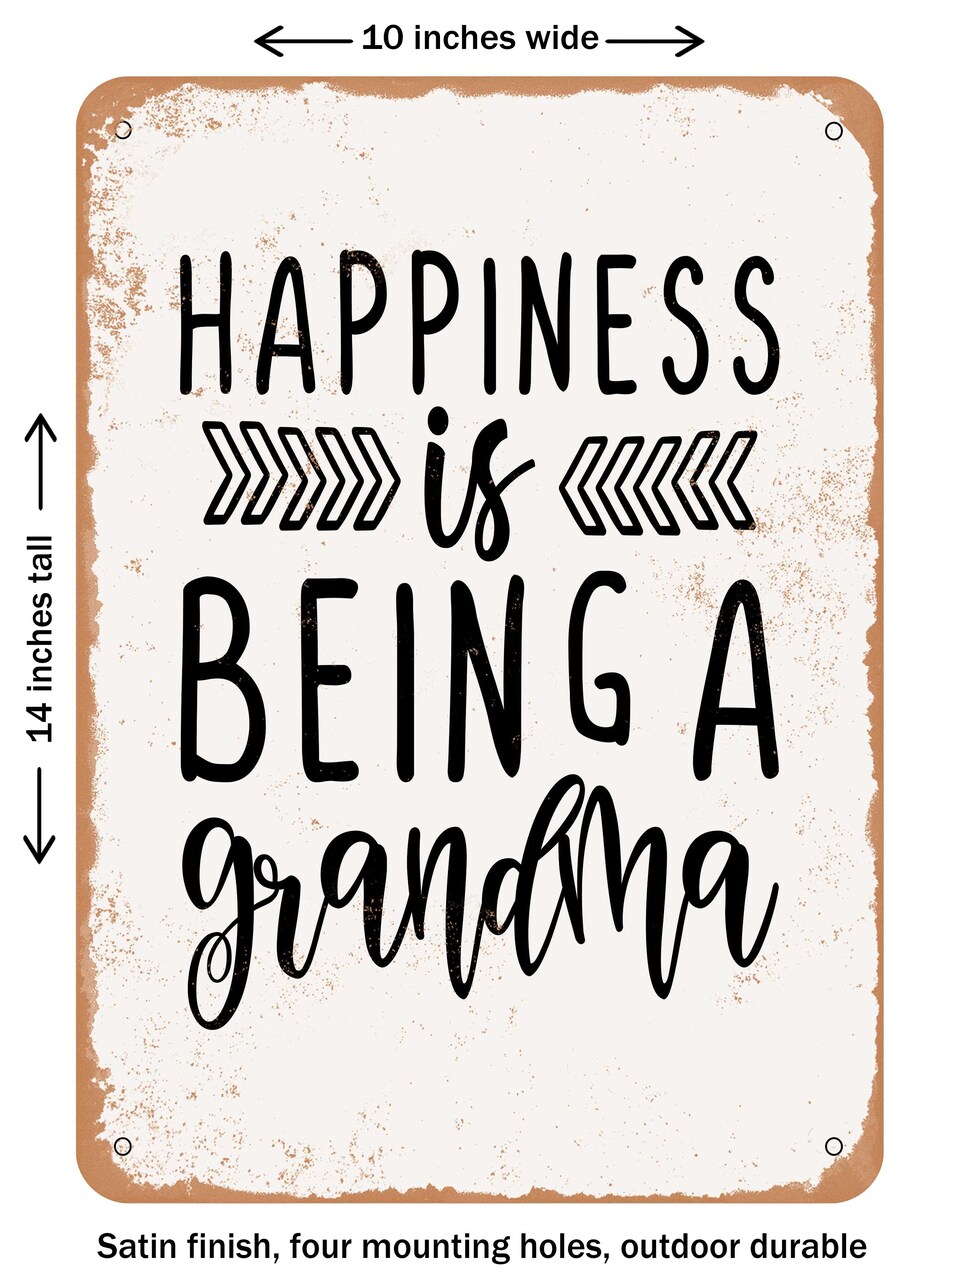 DECORATIVE METAL SIGN - Happiness is Being a Grandma  - Vintage Rusty Look